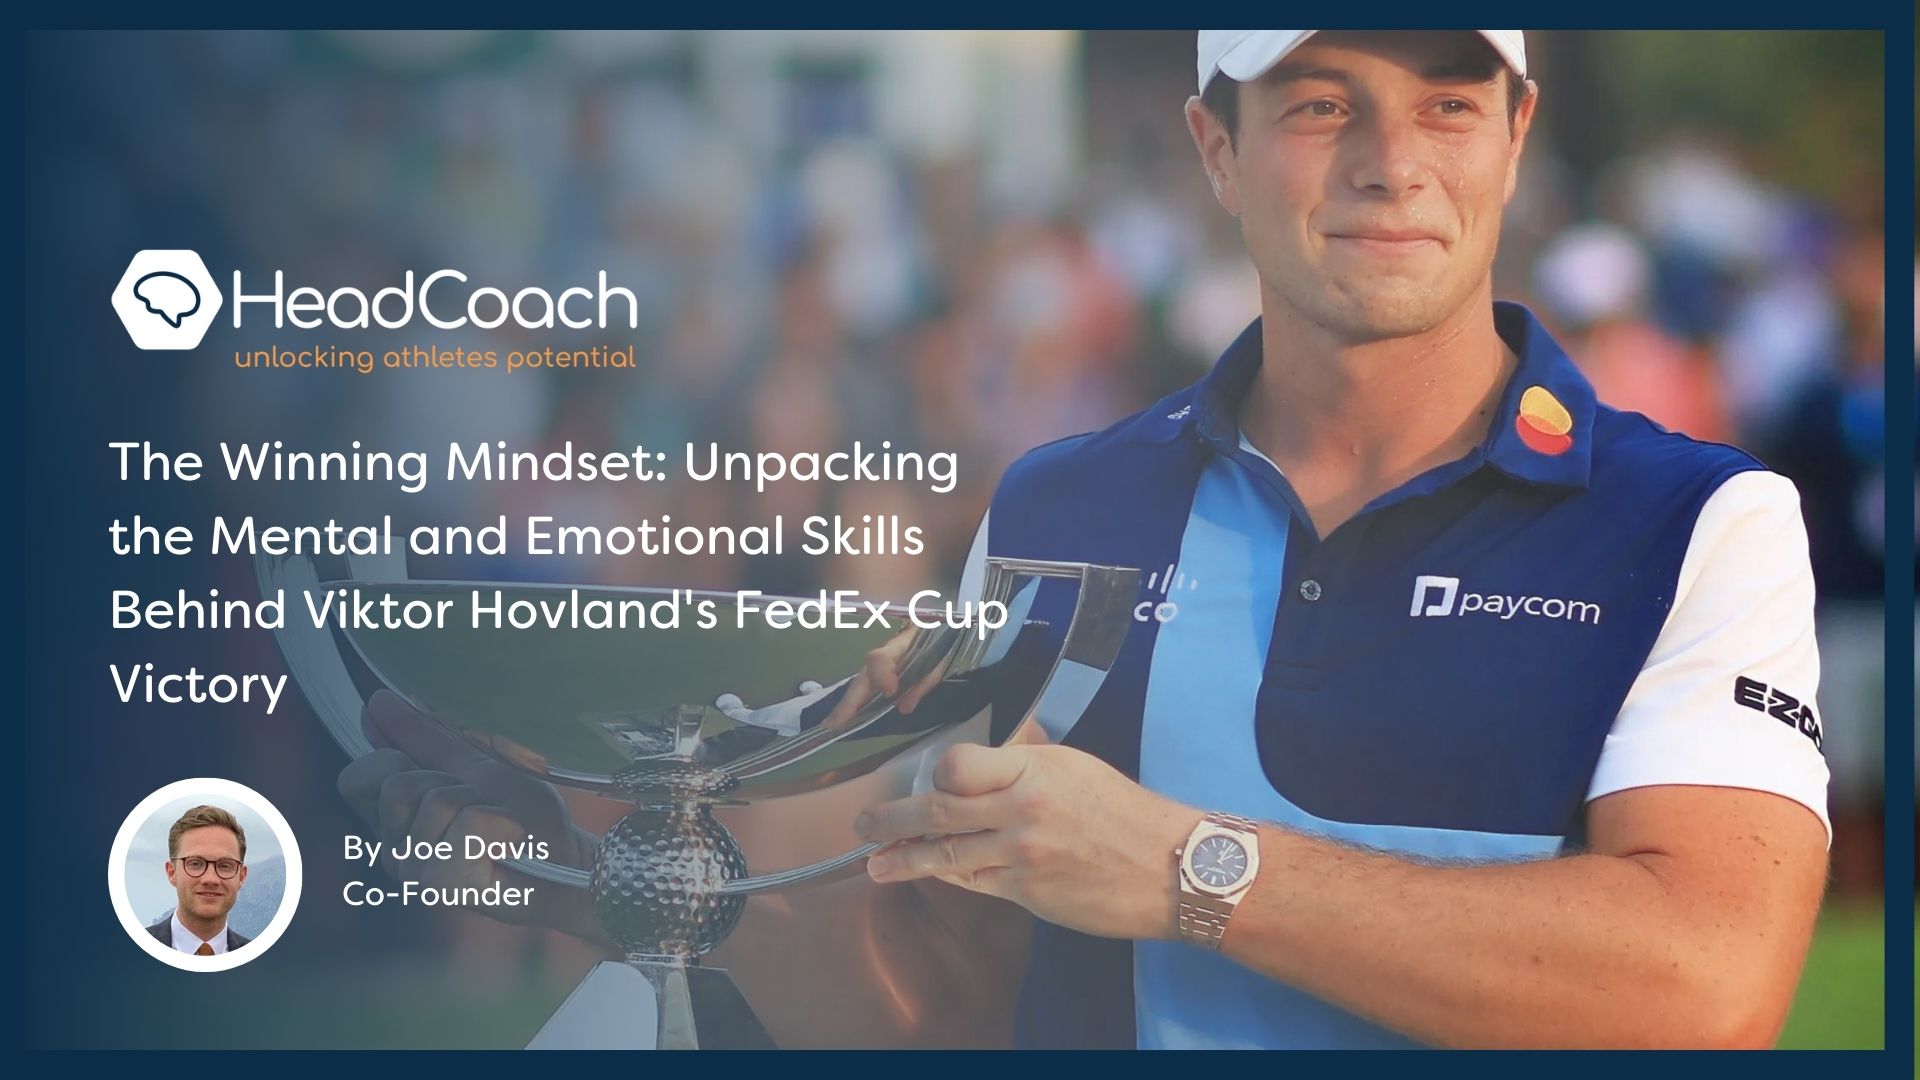 The Winning Mindset: Unpacking the Mental and Emotional Skills Behind Viktor Hovland's FedEx Cup Victory